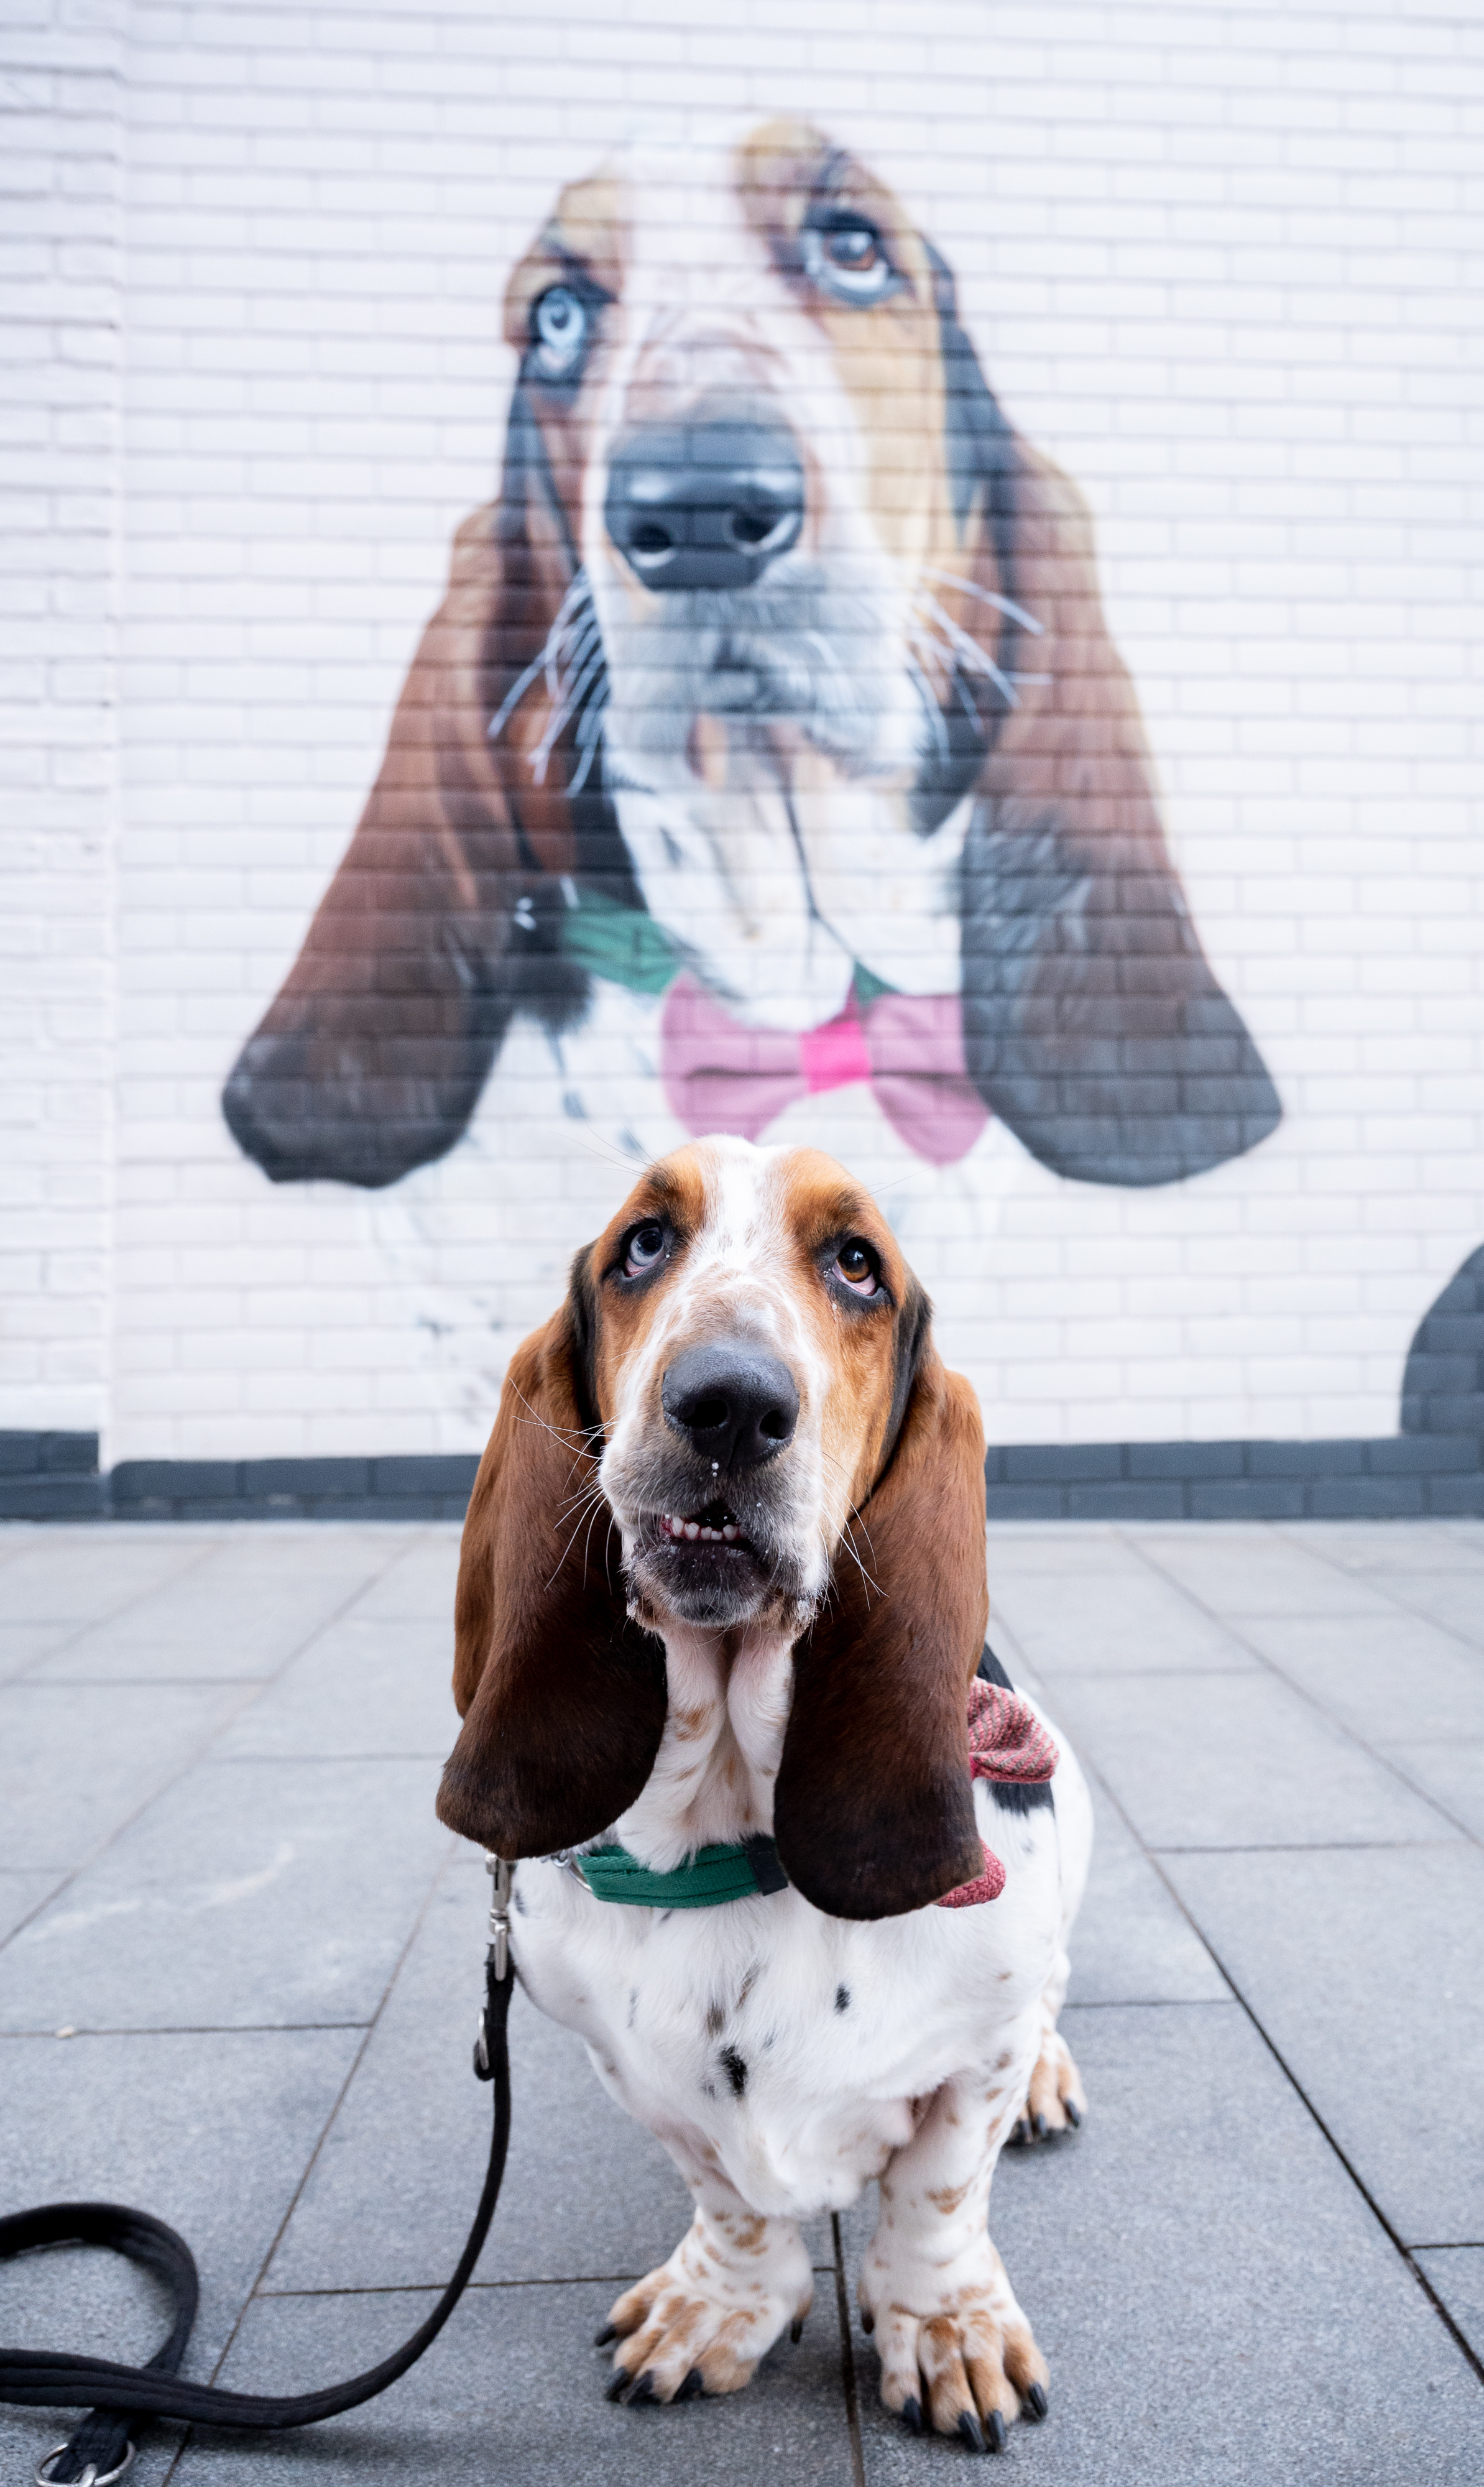 Basil at the new puppy mural.